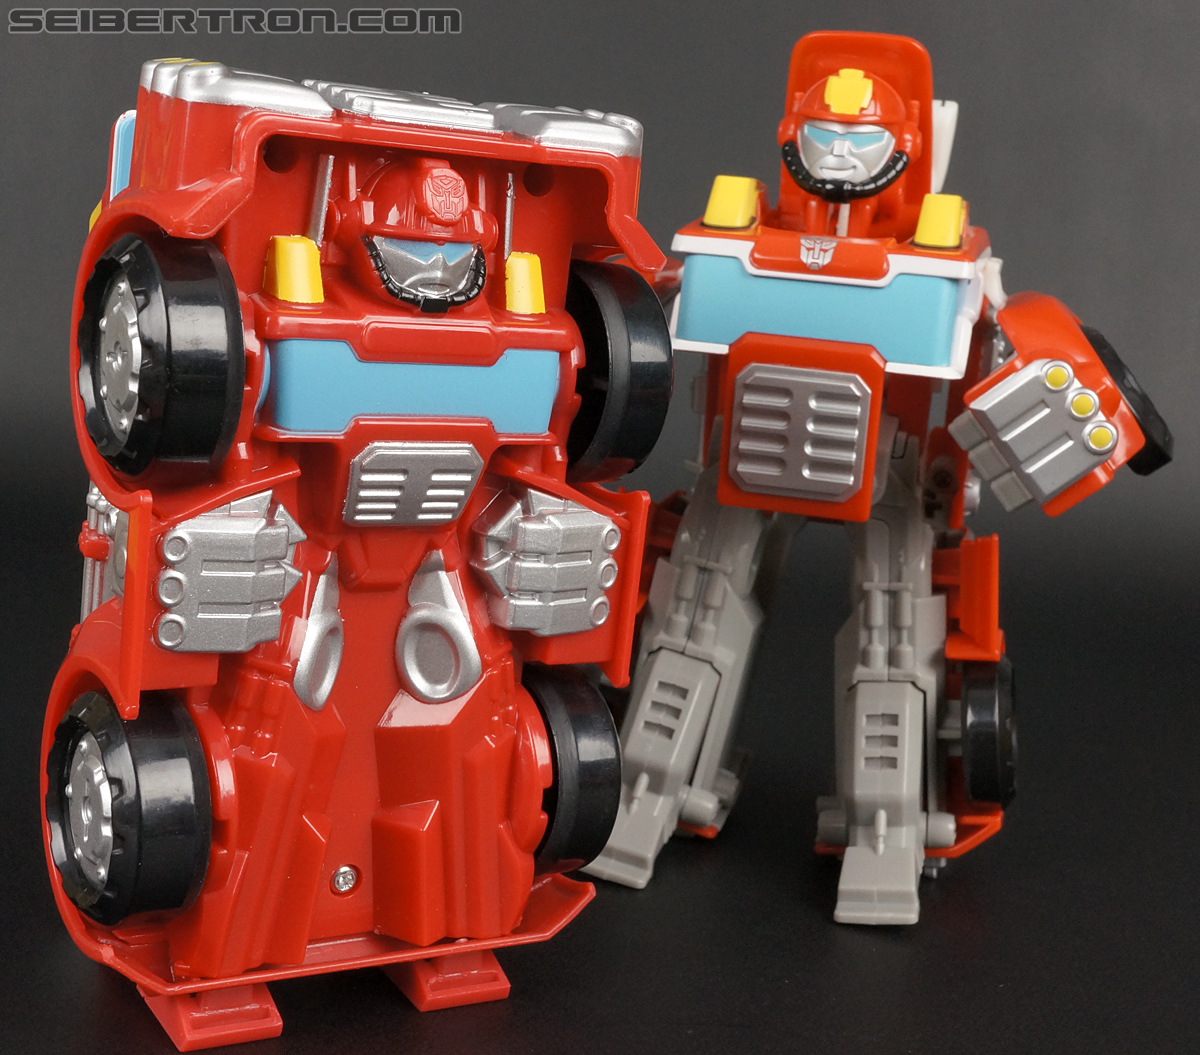 Transformers Rescue Bots Heatwave the Fire-Bot (Fire Station Prime) (Image #58 of 64)